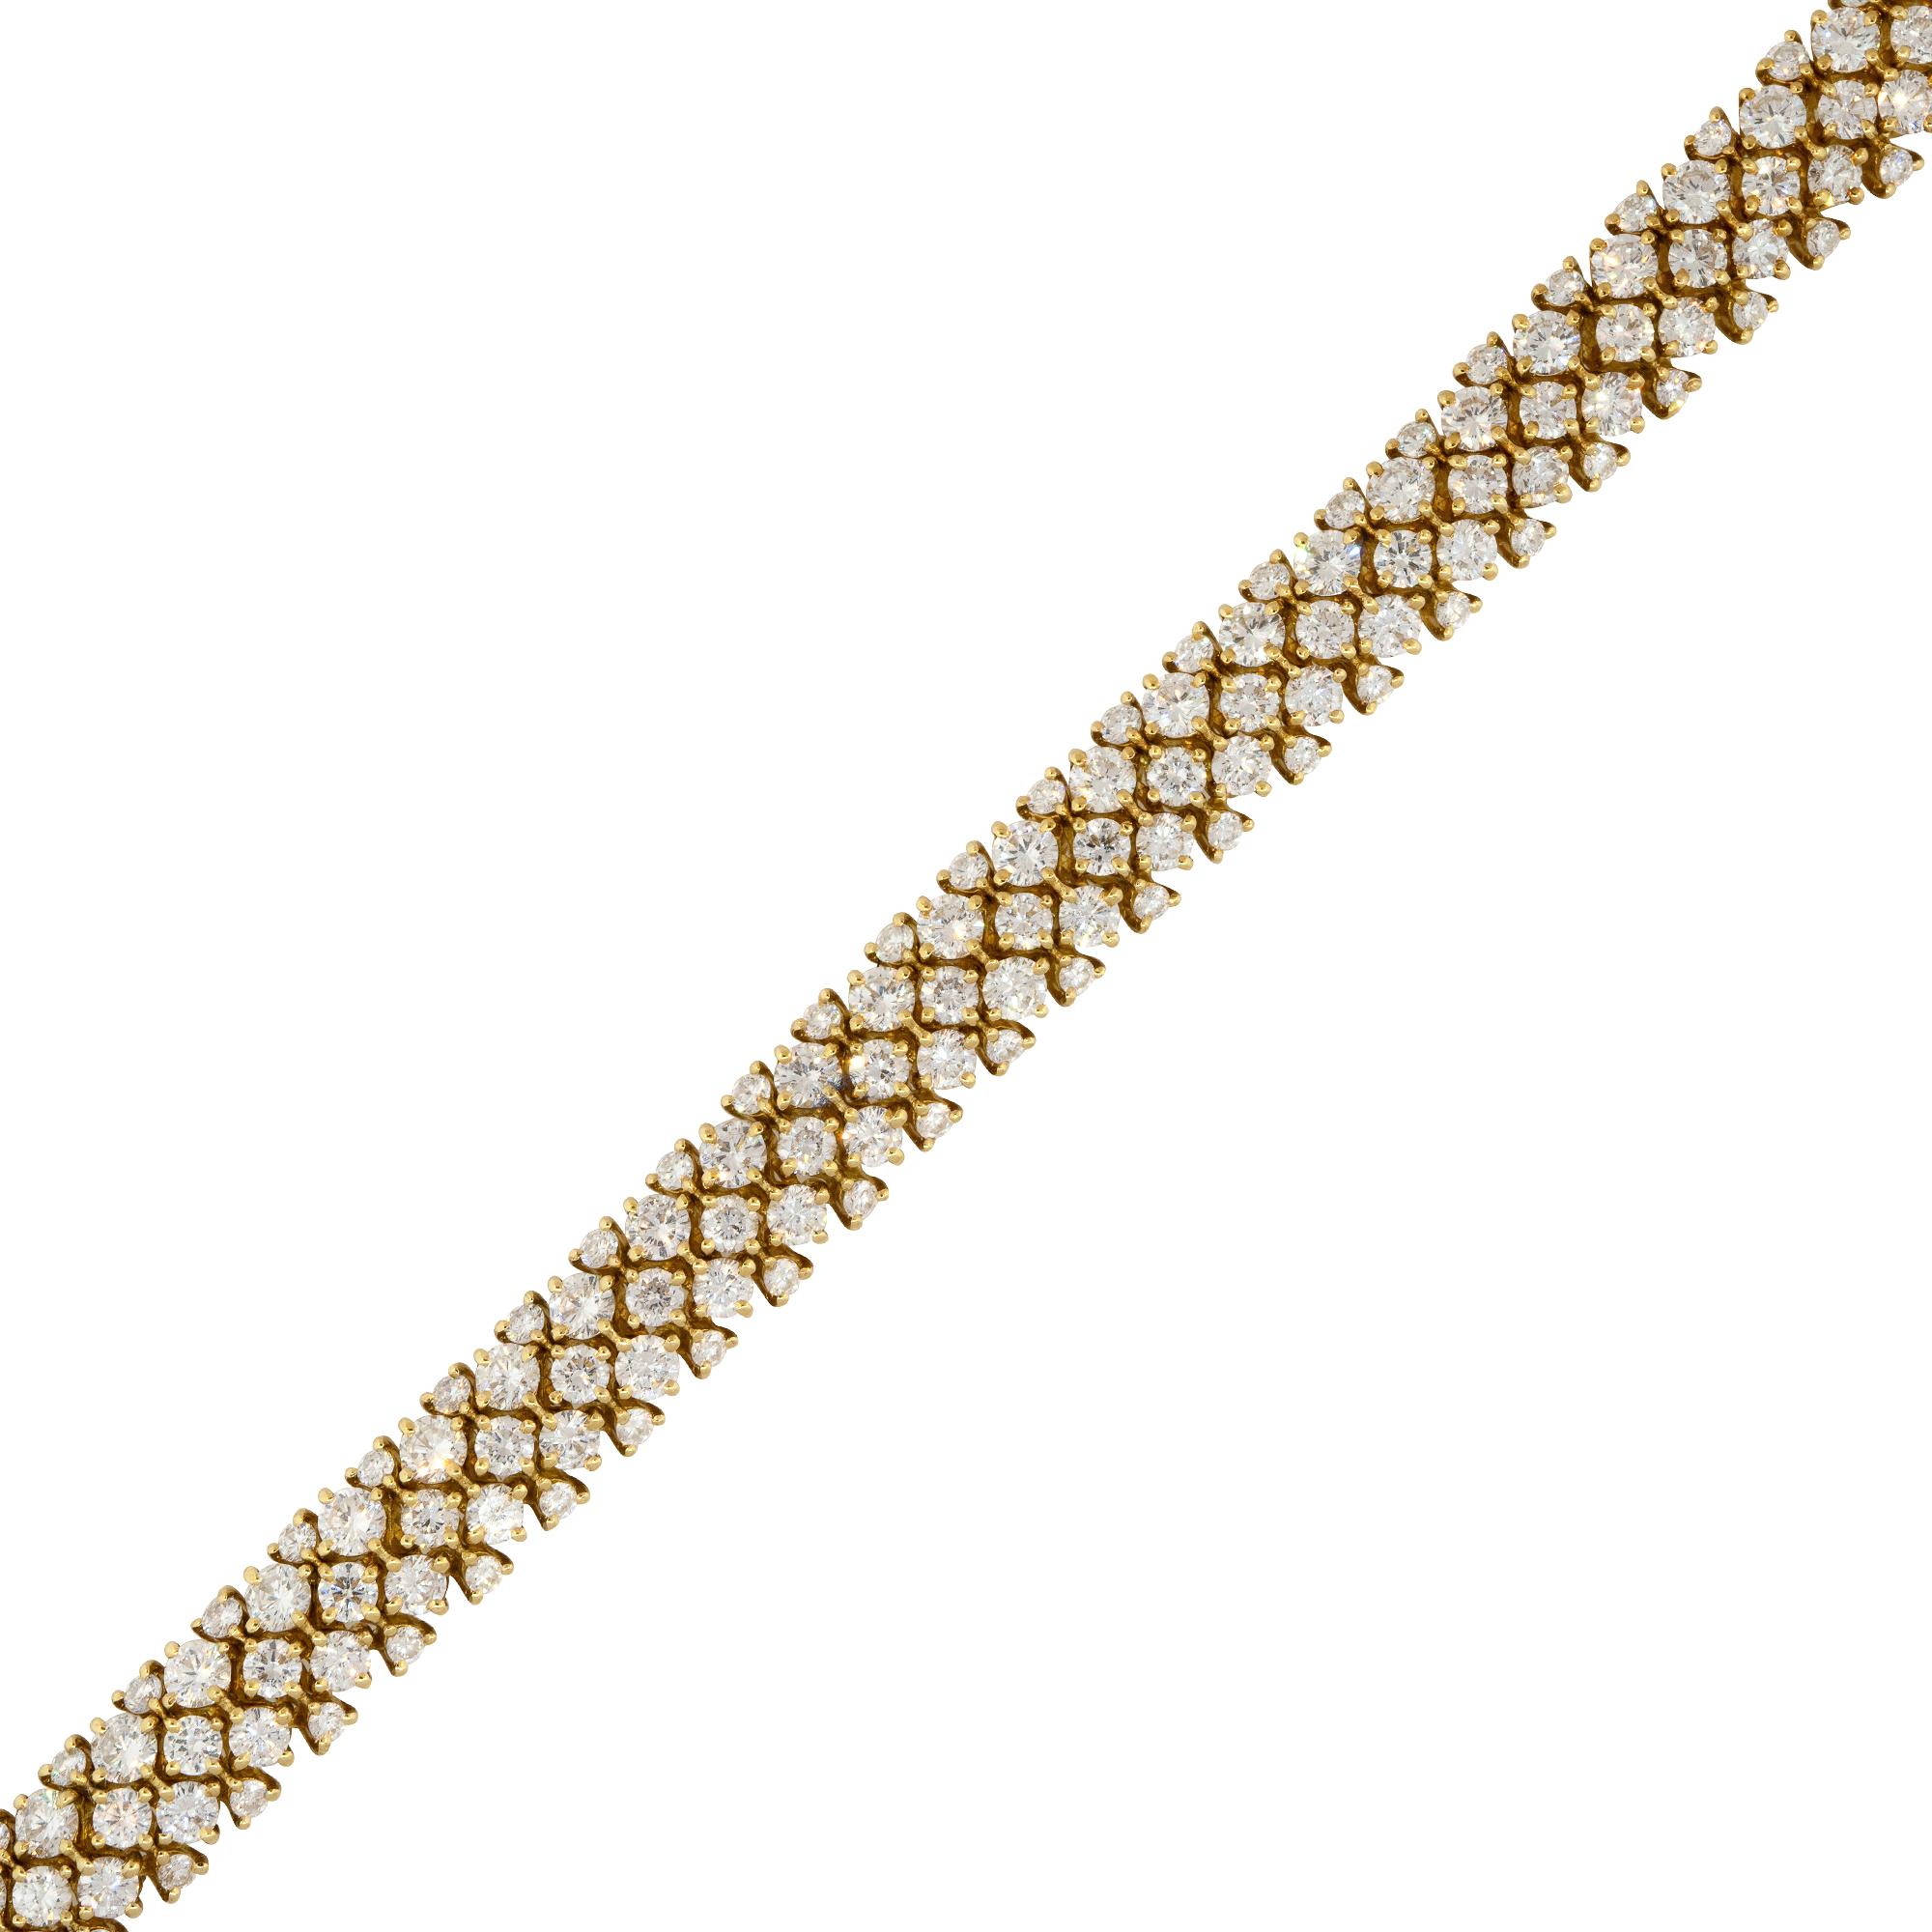 18k Yellow Gold 32.0ctw Flexible 3 Row Diamond Necklace

Material: 18k Yellow Gold
Diamond Details: Approximately 32.0ctw of Round Cut Diamonds. Diamonds are G/H in color and VS in clarity
Chain Details: Tongue in Box Clasp with Safety Lock
Total